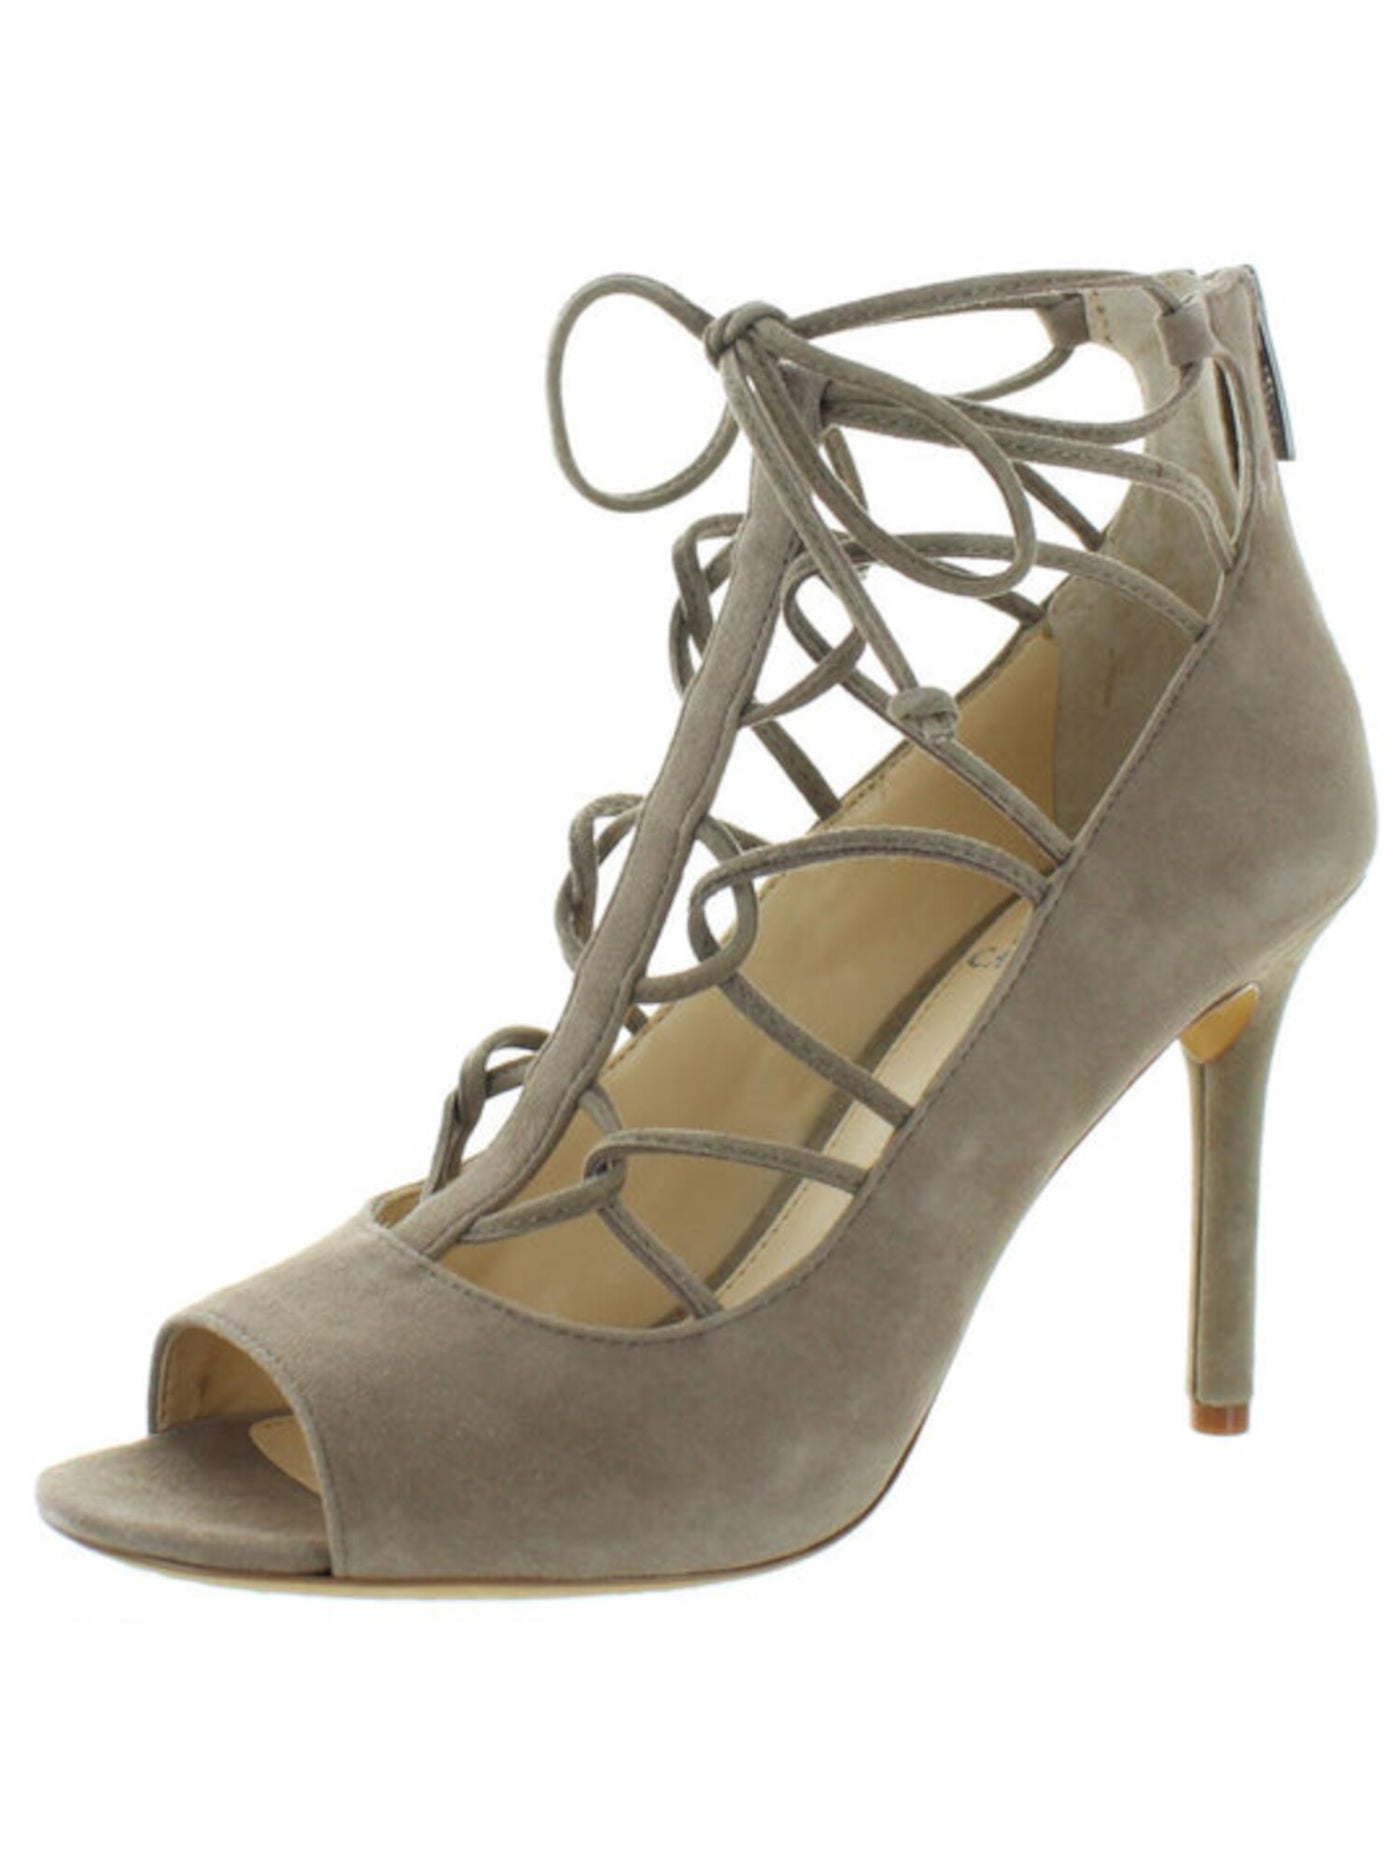 VINCE CAMUTO Womens Beige Cage-Inspired Lace Comfort Chennan Open Toe Stiletto Zip-Up Suede Dress Pumps Shoes 8 M